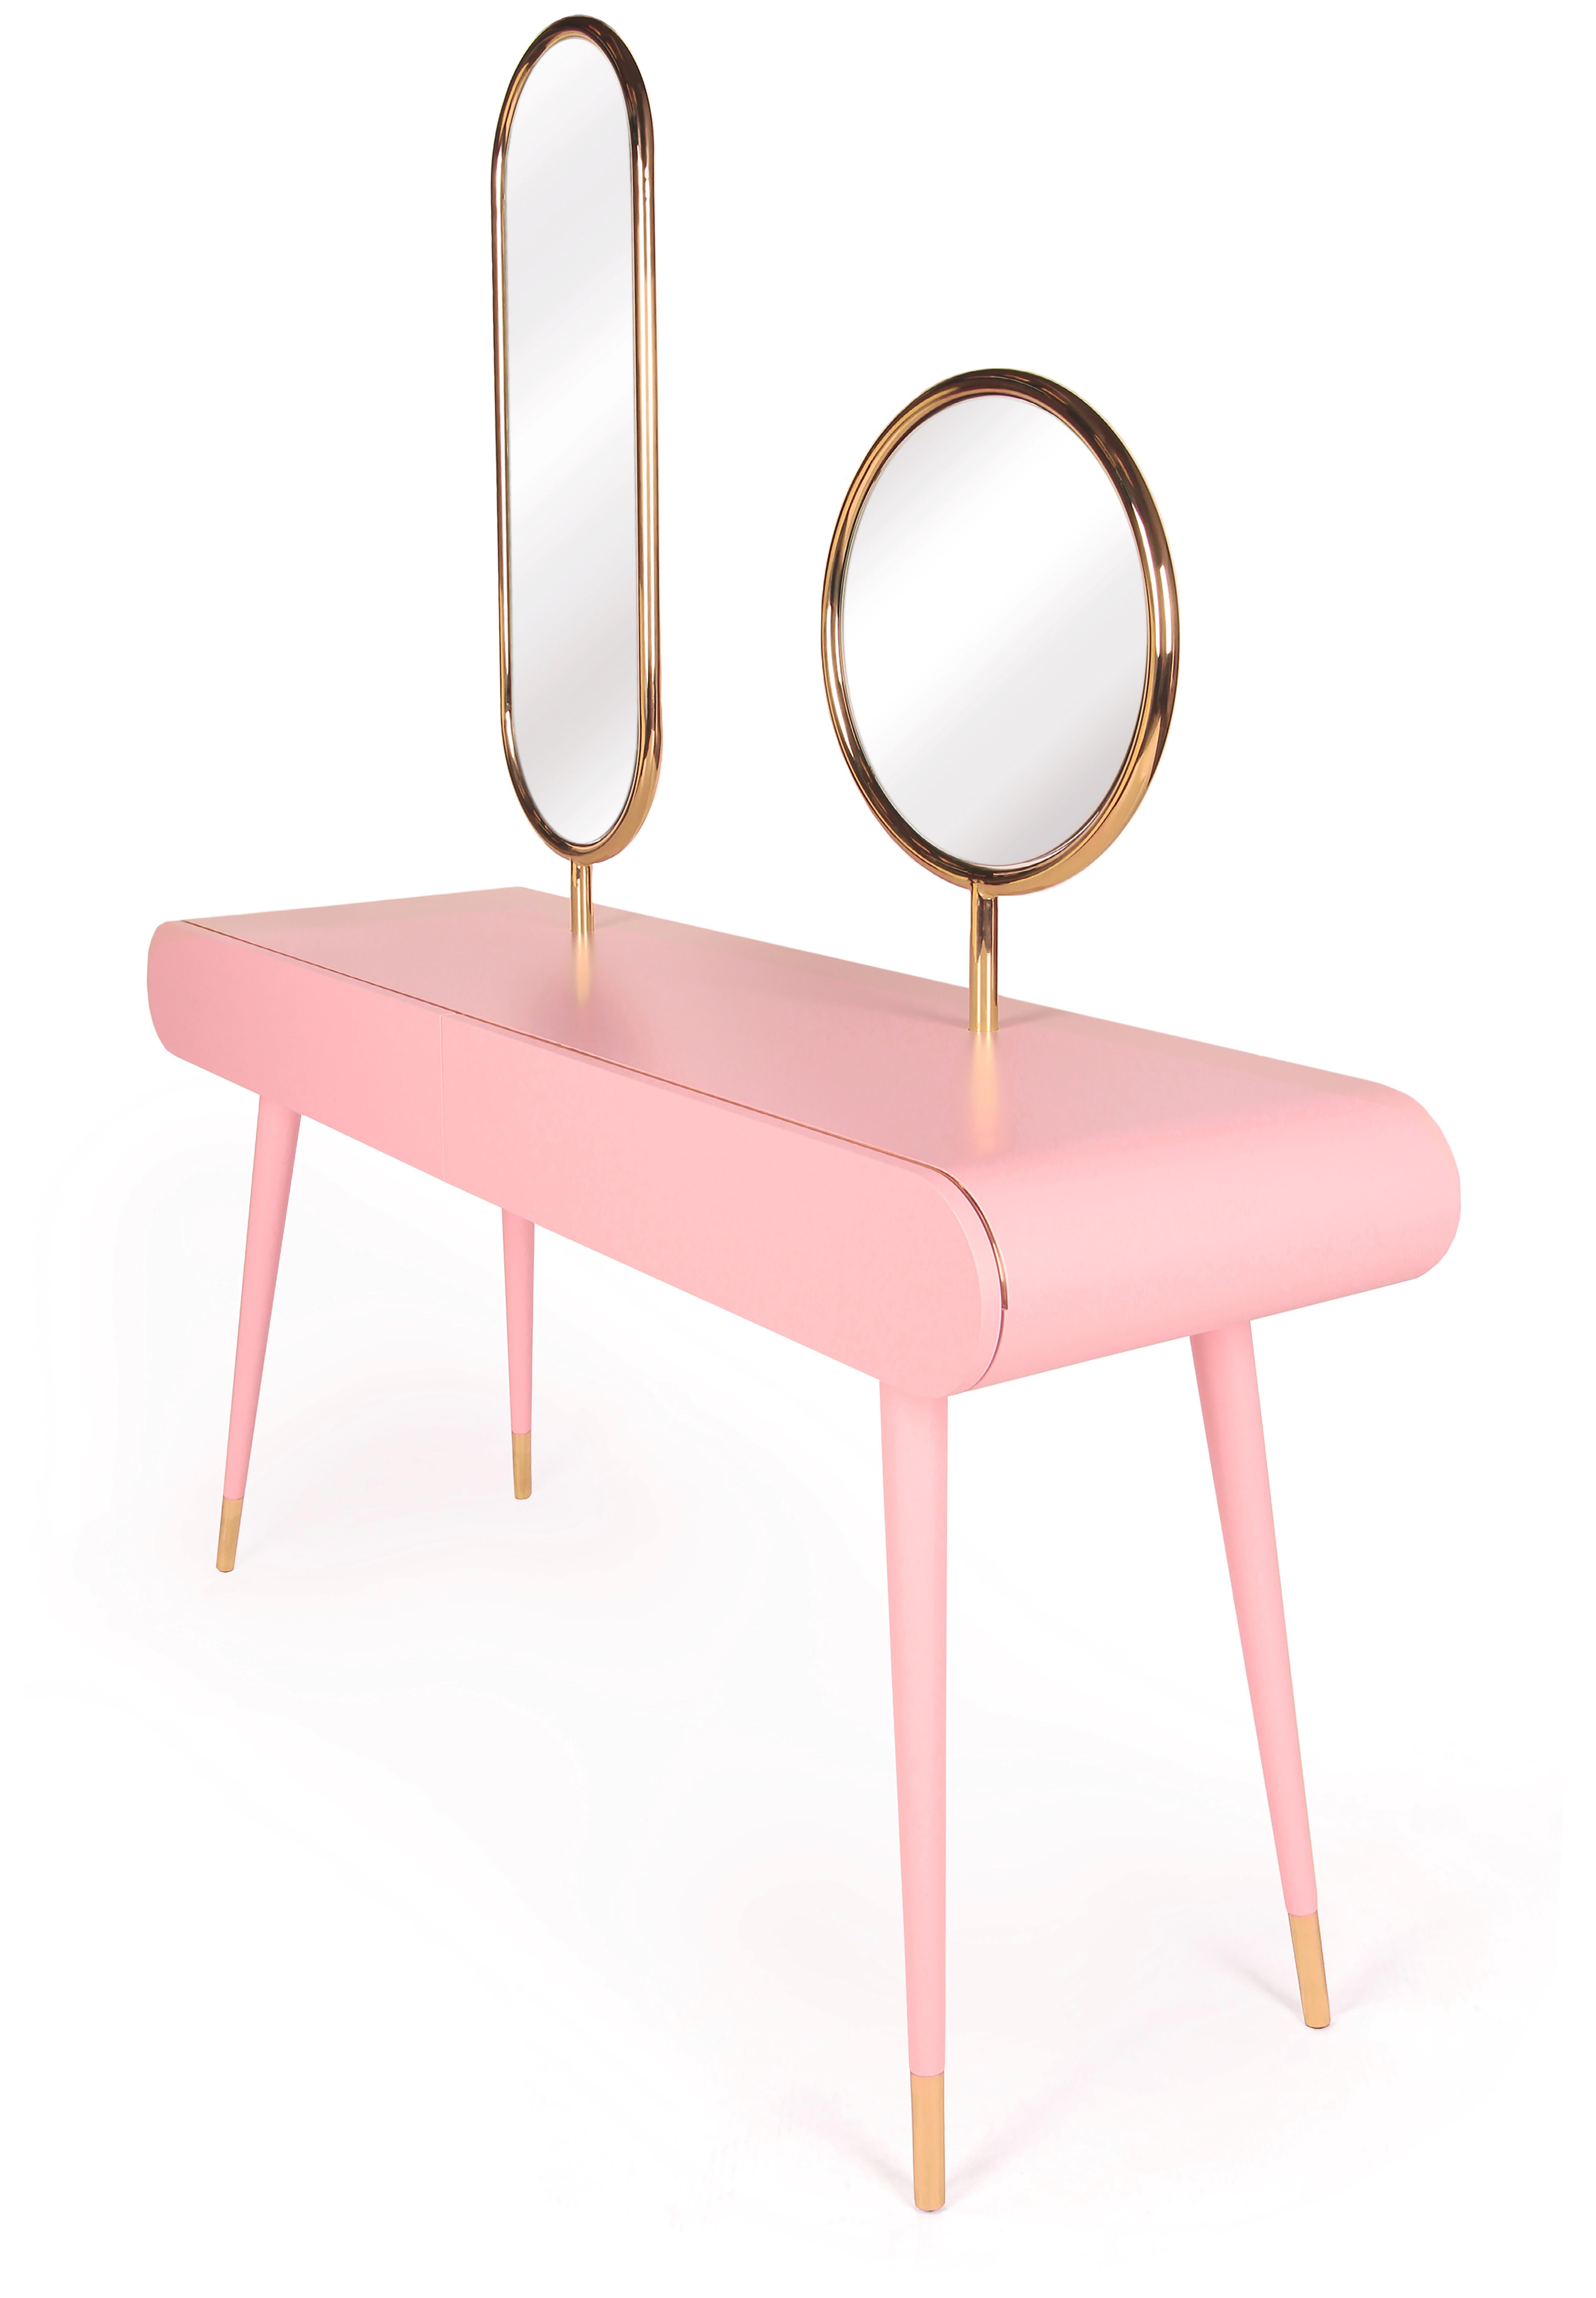 Contemporary Pearl Grace Dressing Table, Royal Stranger